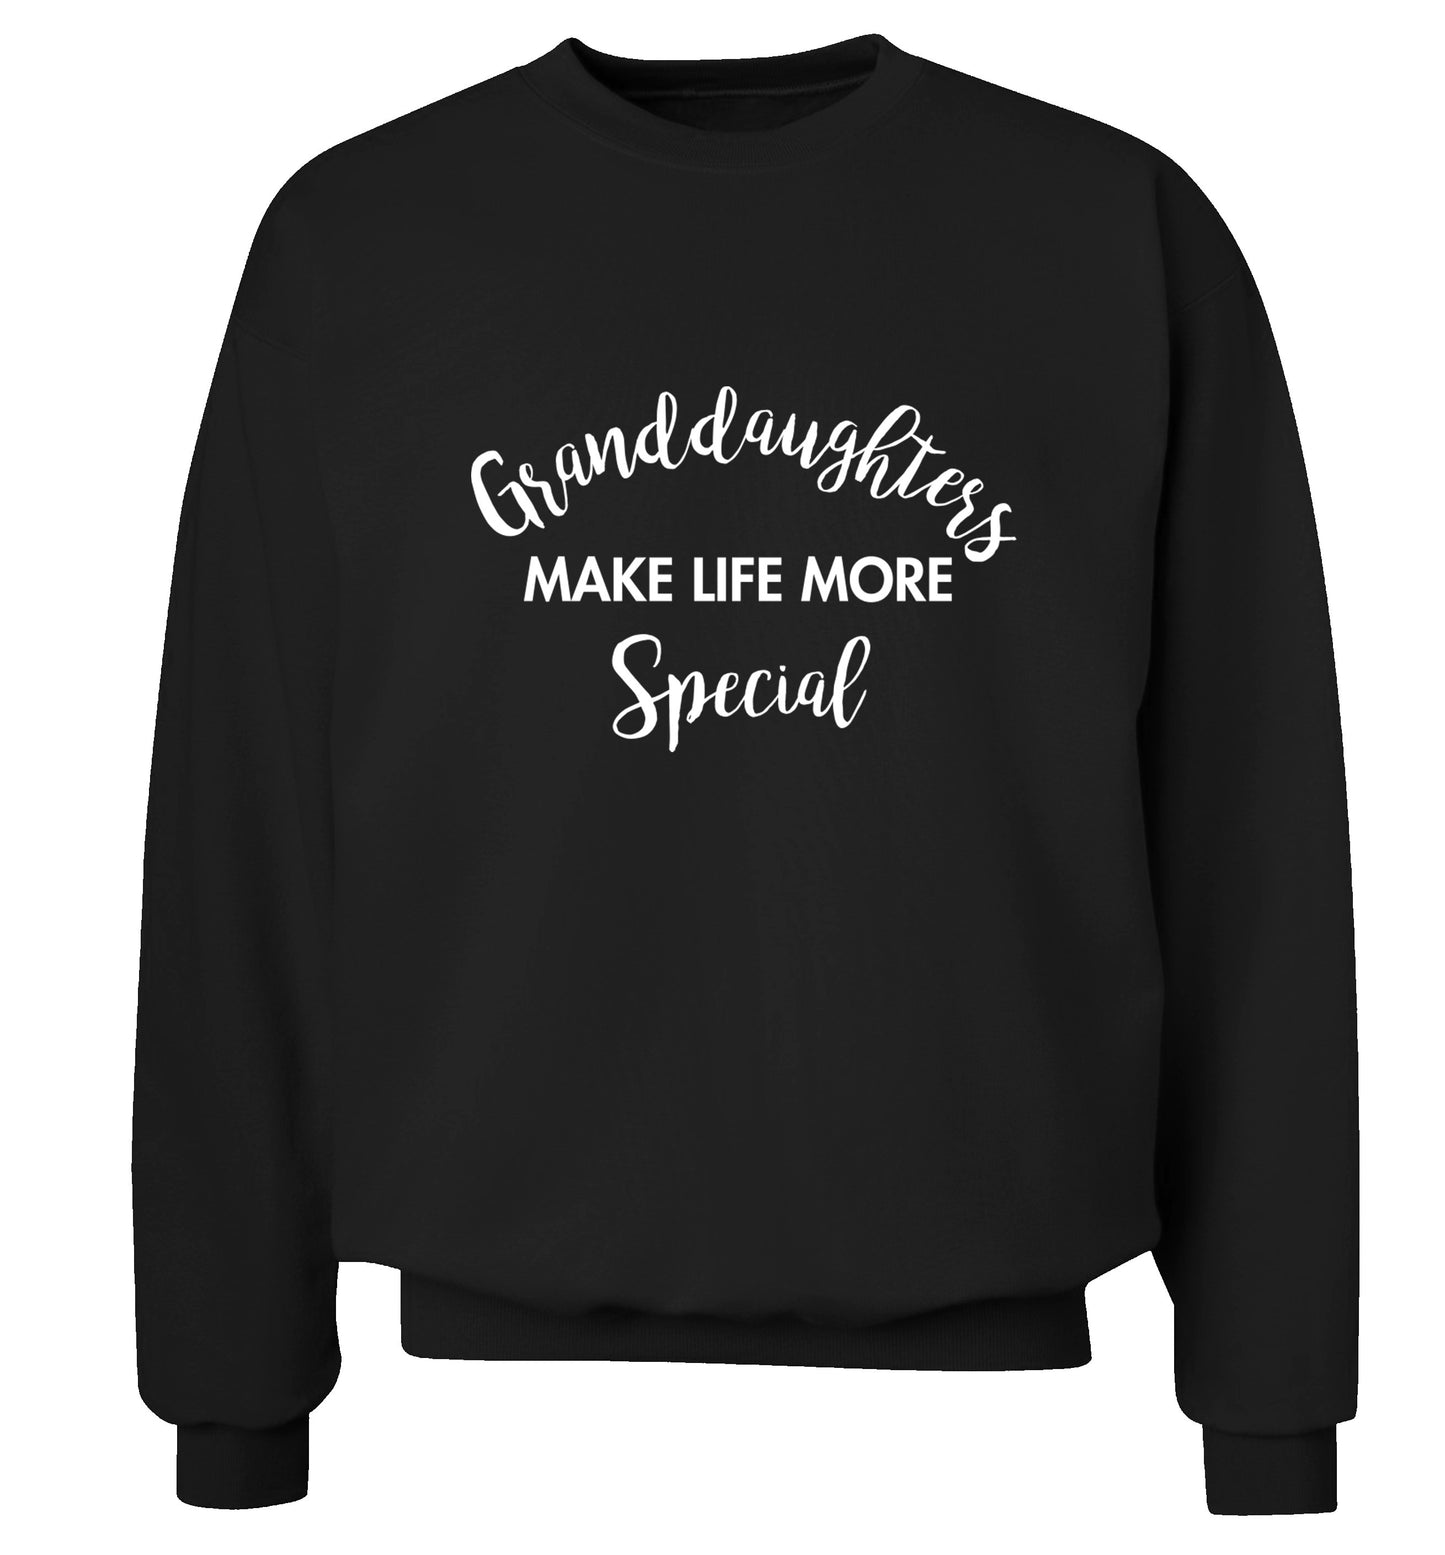 Granddaughters make life more special Adult's unisex black Sweater 2XL